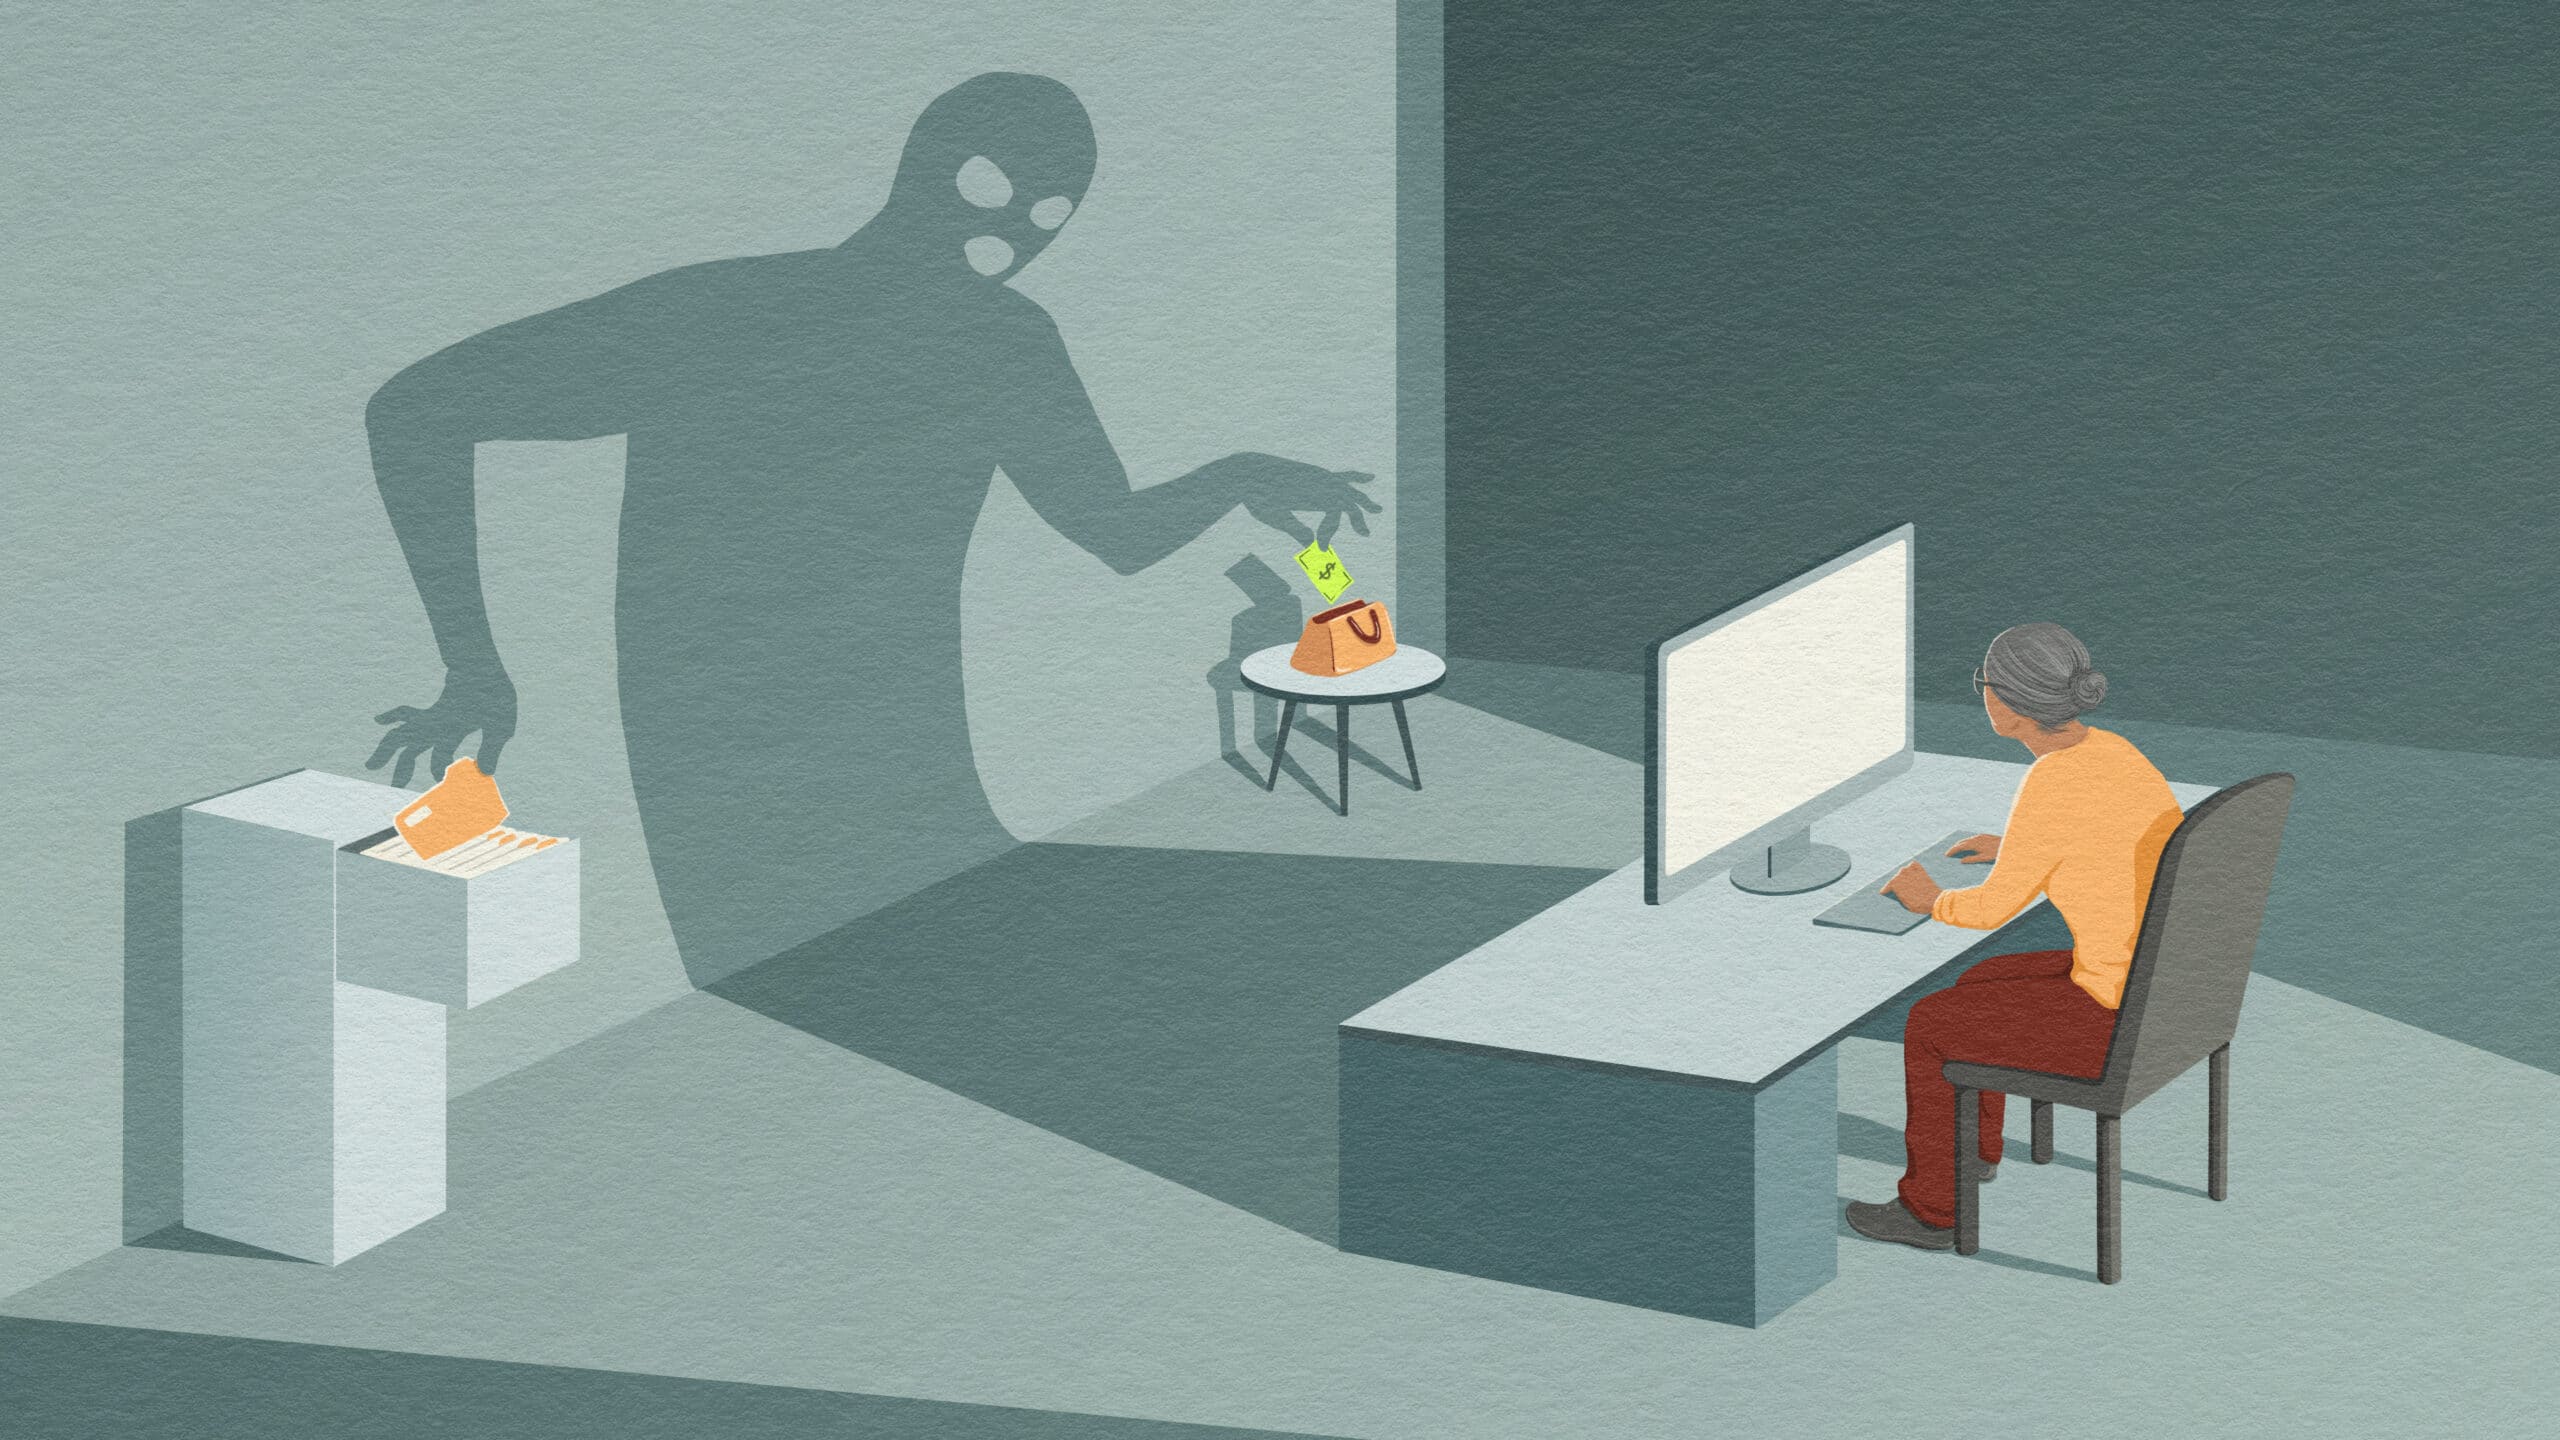 Illustration of senior woman working at her computer. The shadow cast from the computer is in the shape of a masked person, stealing money from her purse and information from her file cabinet.